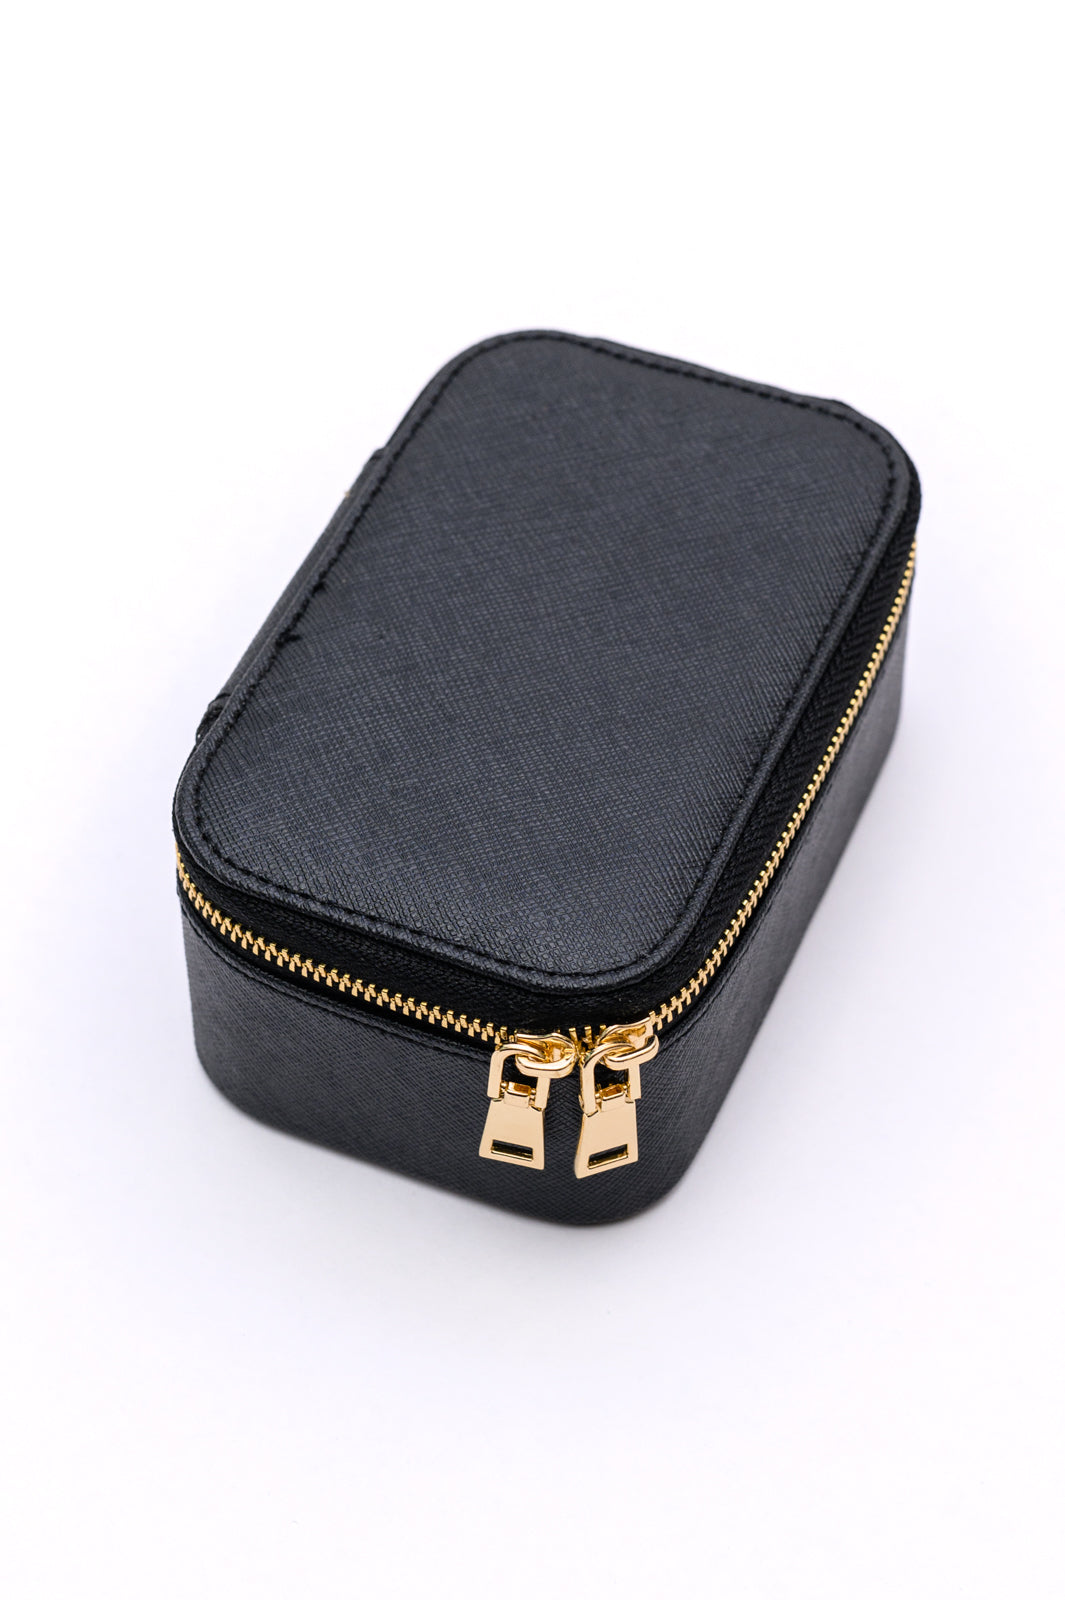 Travel Jewelry Case in Black-Womens-OS-mercuryfoodservice Shop for Women & Kids